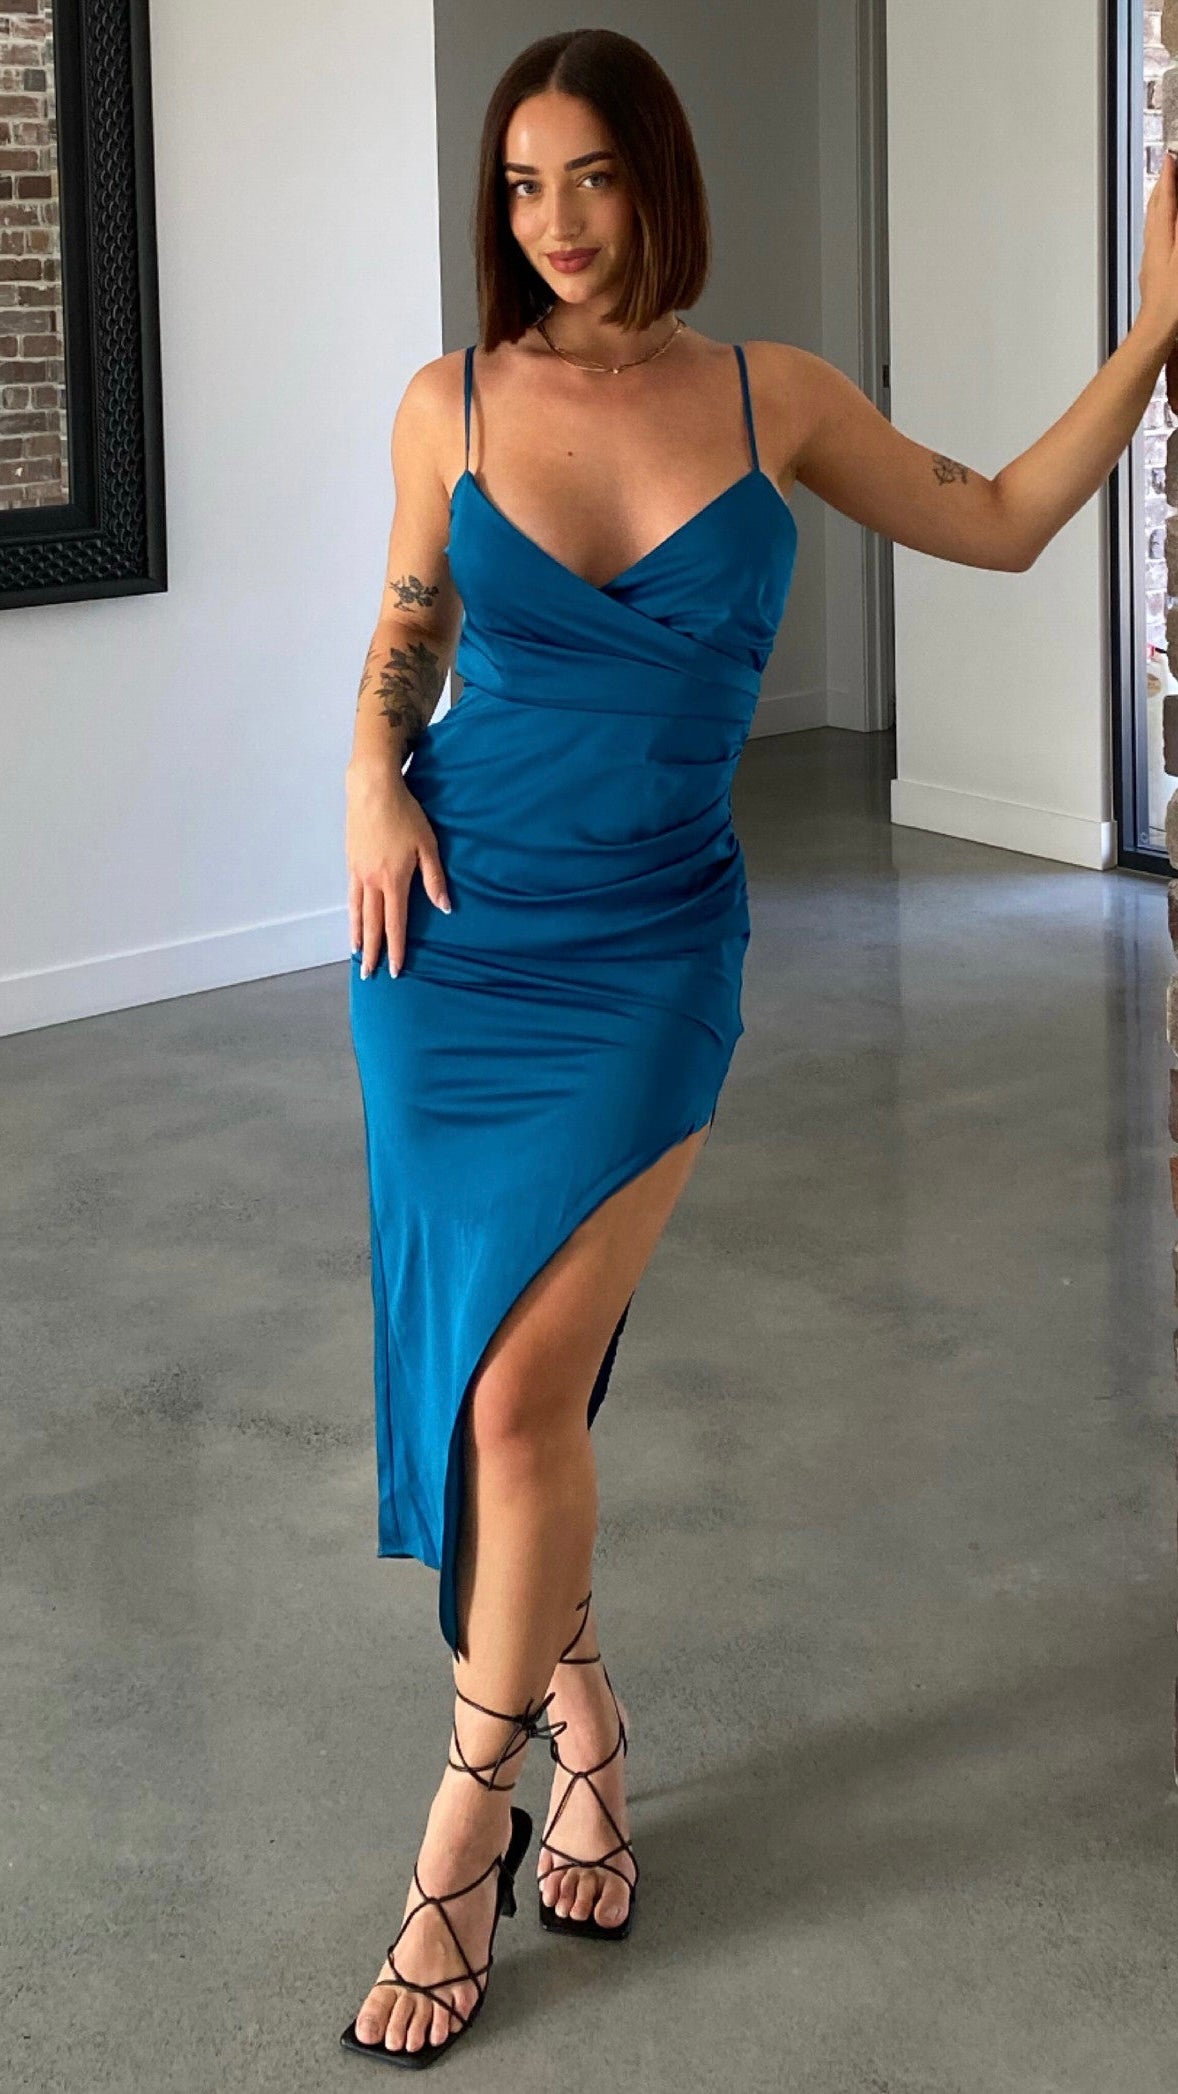 Haidee Dress - Blue Jade | Style State | This satin feel cocktail dress is the perfect addition to your next girls night or cocktail function

Zip up back
Adjustable straps
Choose size according to your bot